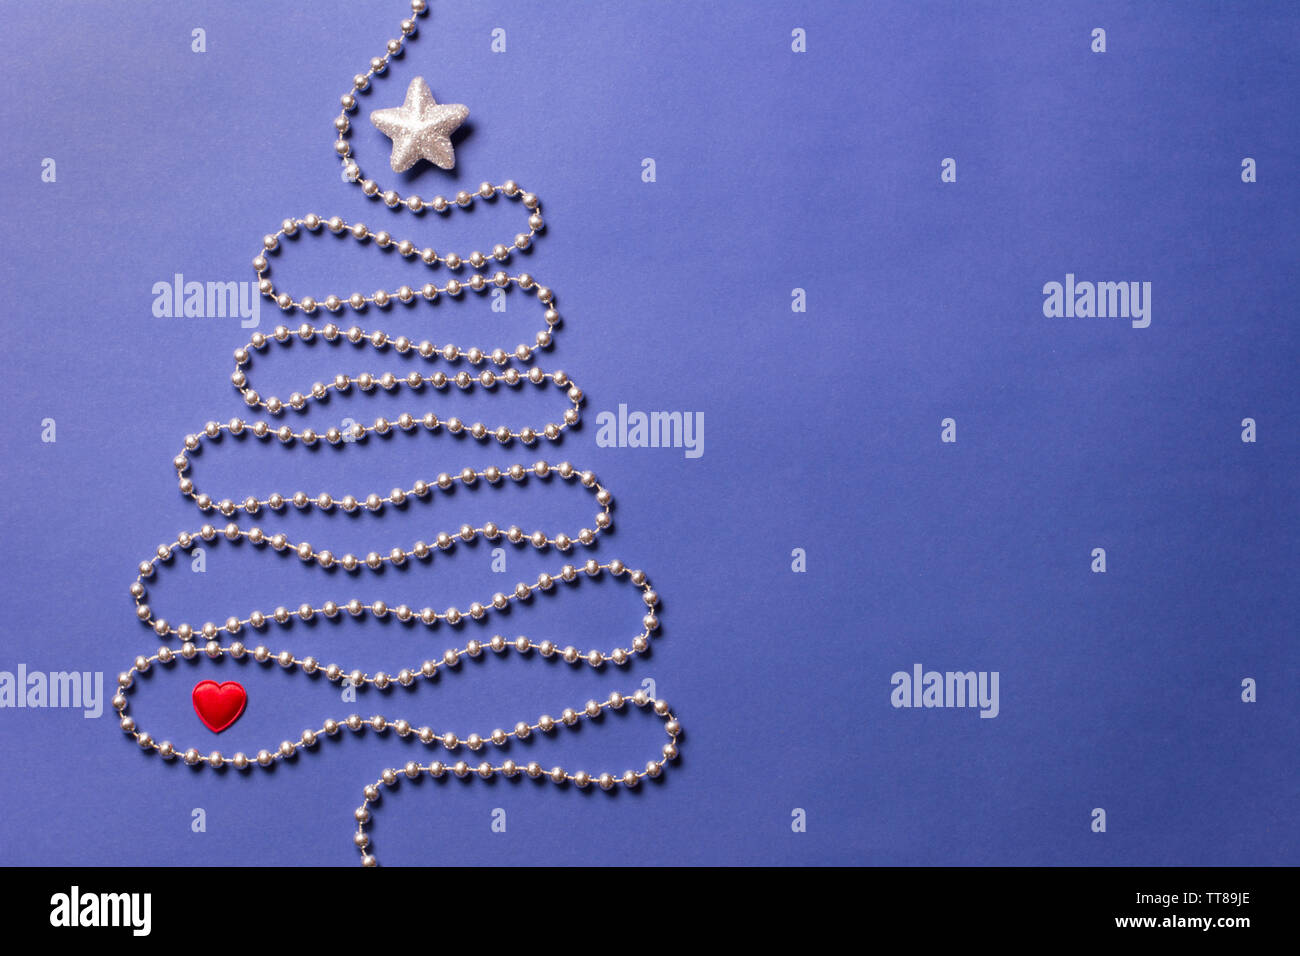 Simple christmas tree concept with silver bead chain, brocade star and red heart on dark blue background - text space Stock Photo